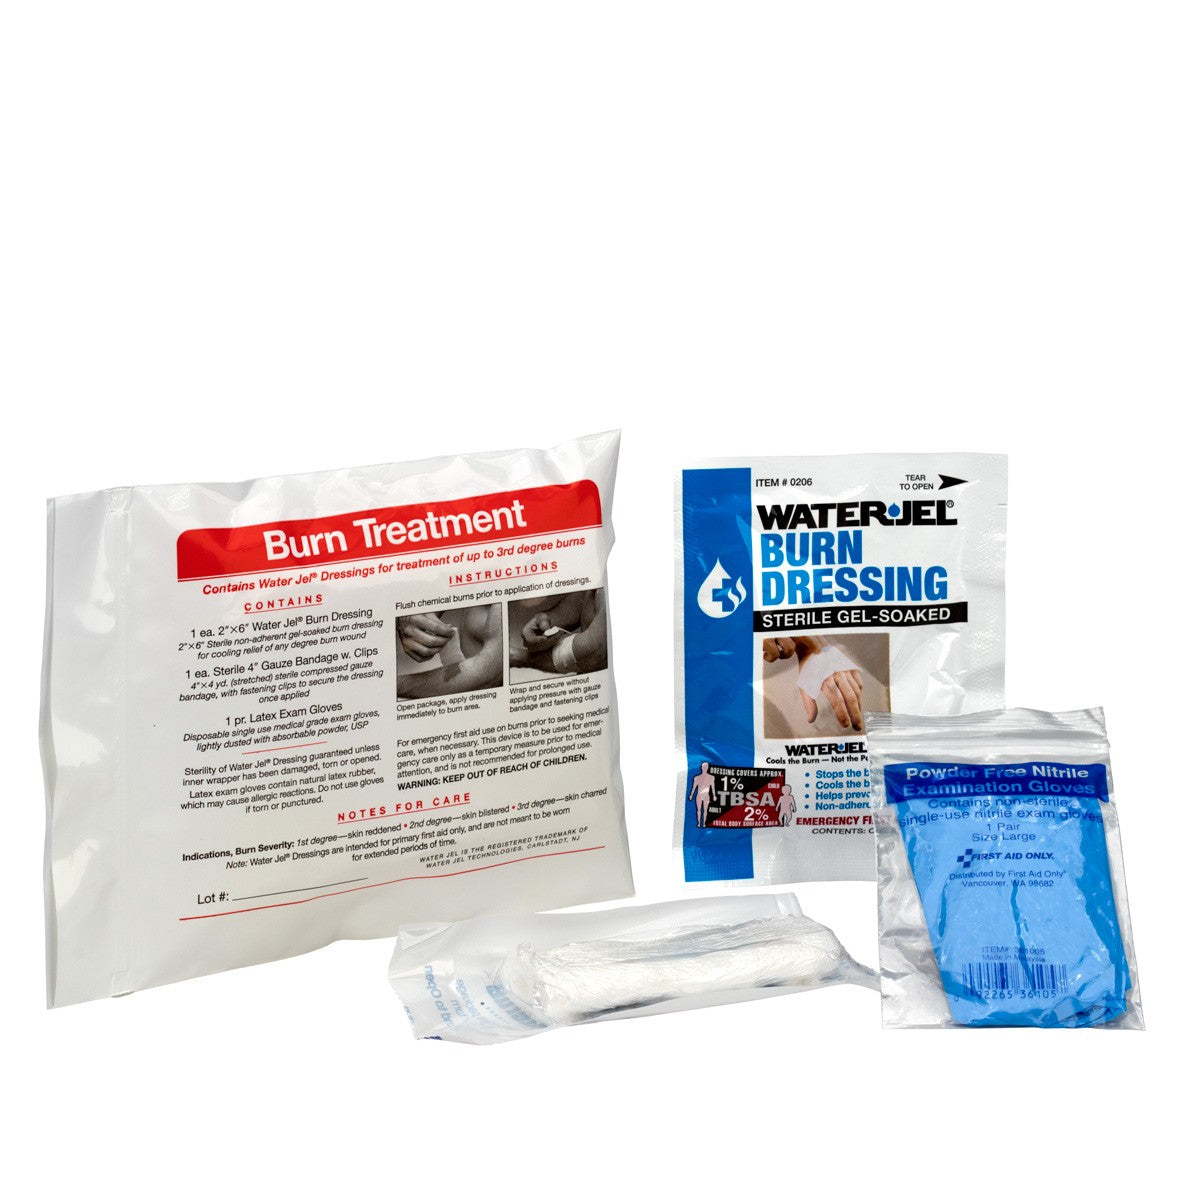 6 Piece Water-Jel Burn Care Triage Pack, First Aid Triage Pack - Burn Care Treatment - W-71-070